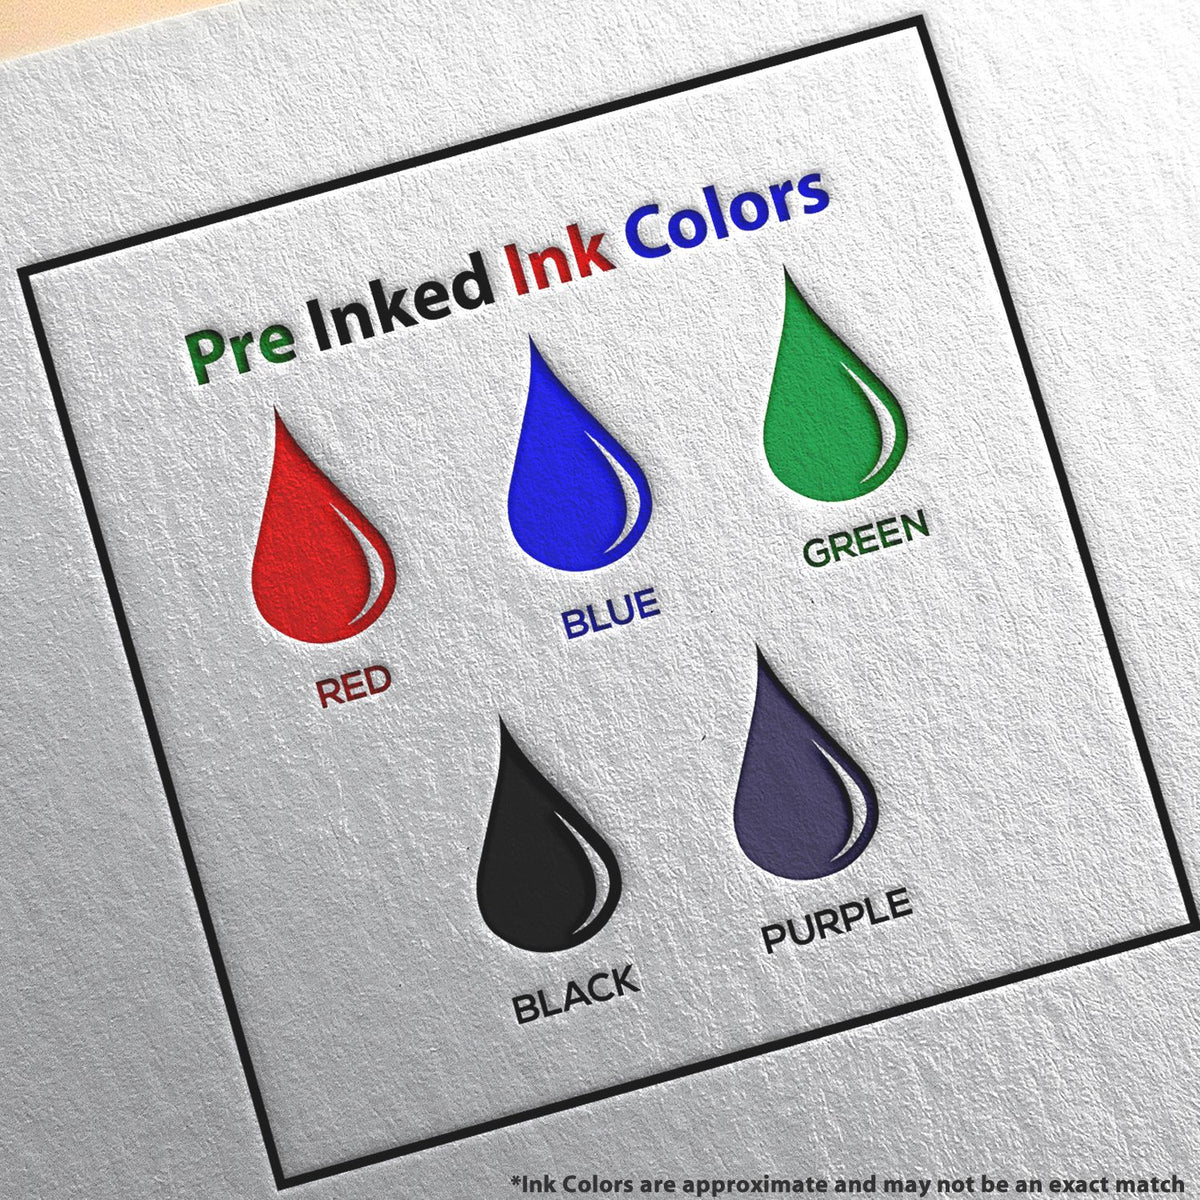 A picture showing the different ink colors or hues available for the PSI Georgia Notary Stamp product.